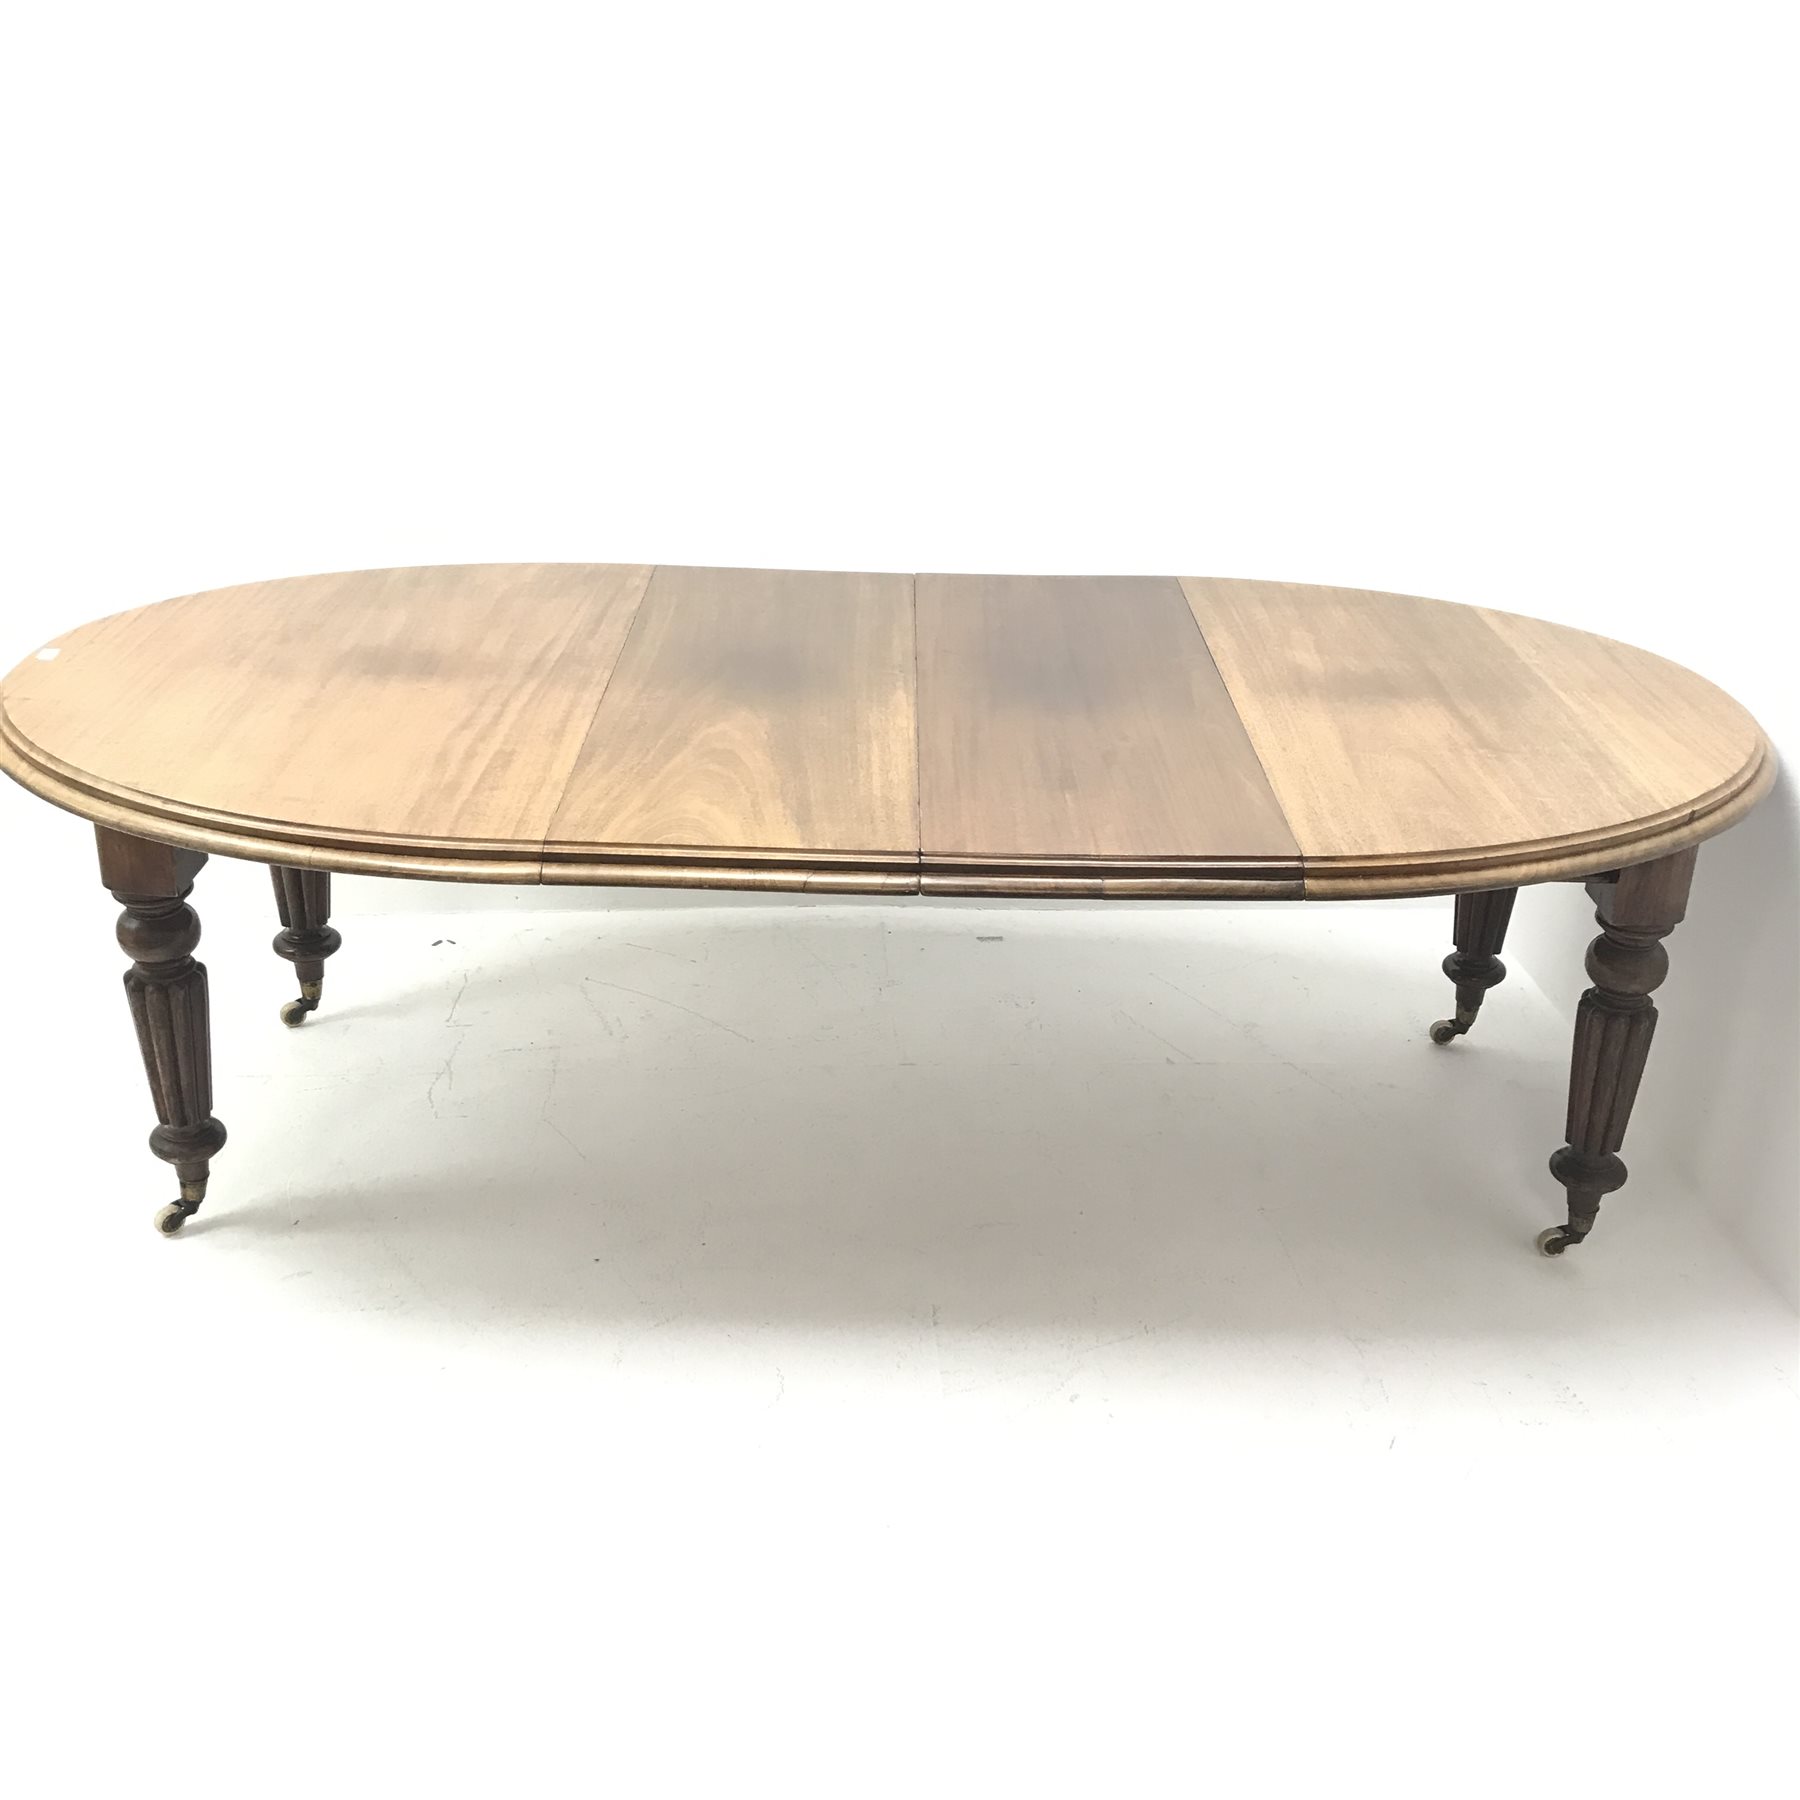 Victorian mahogany telescopic extending dining table with two leaves, turned supports, W217cm, H73cm - Image 2 of 4